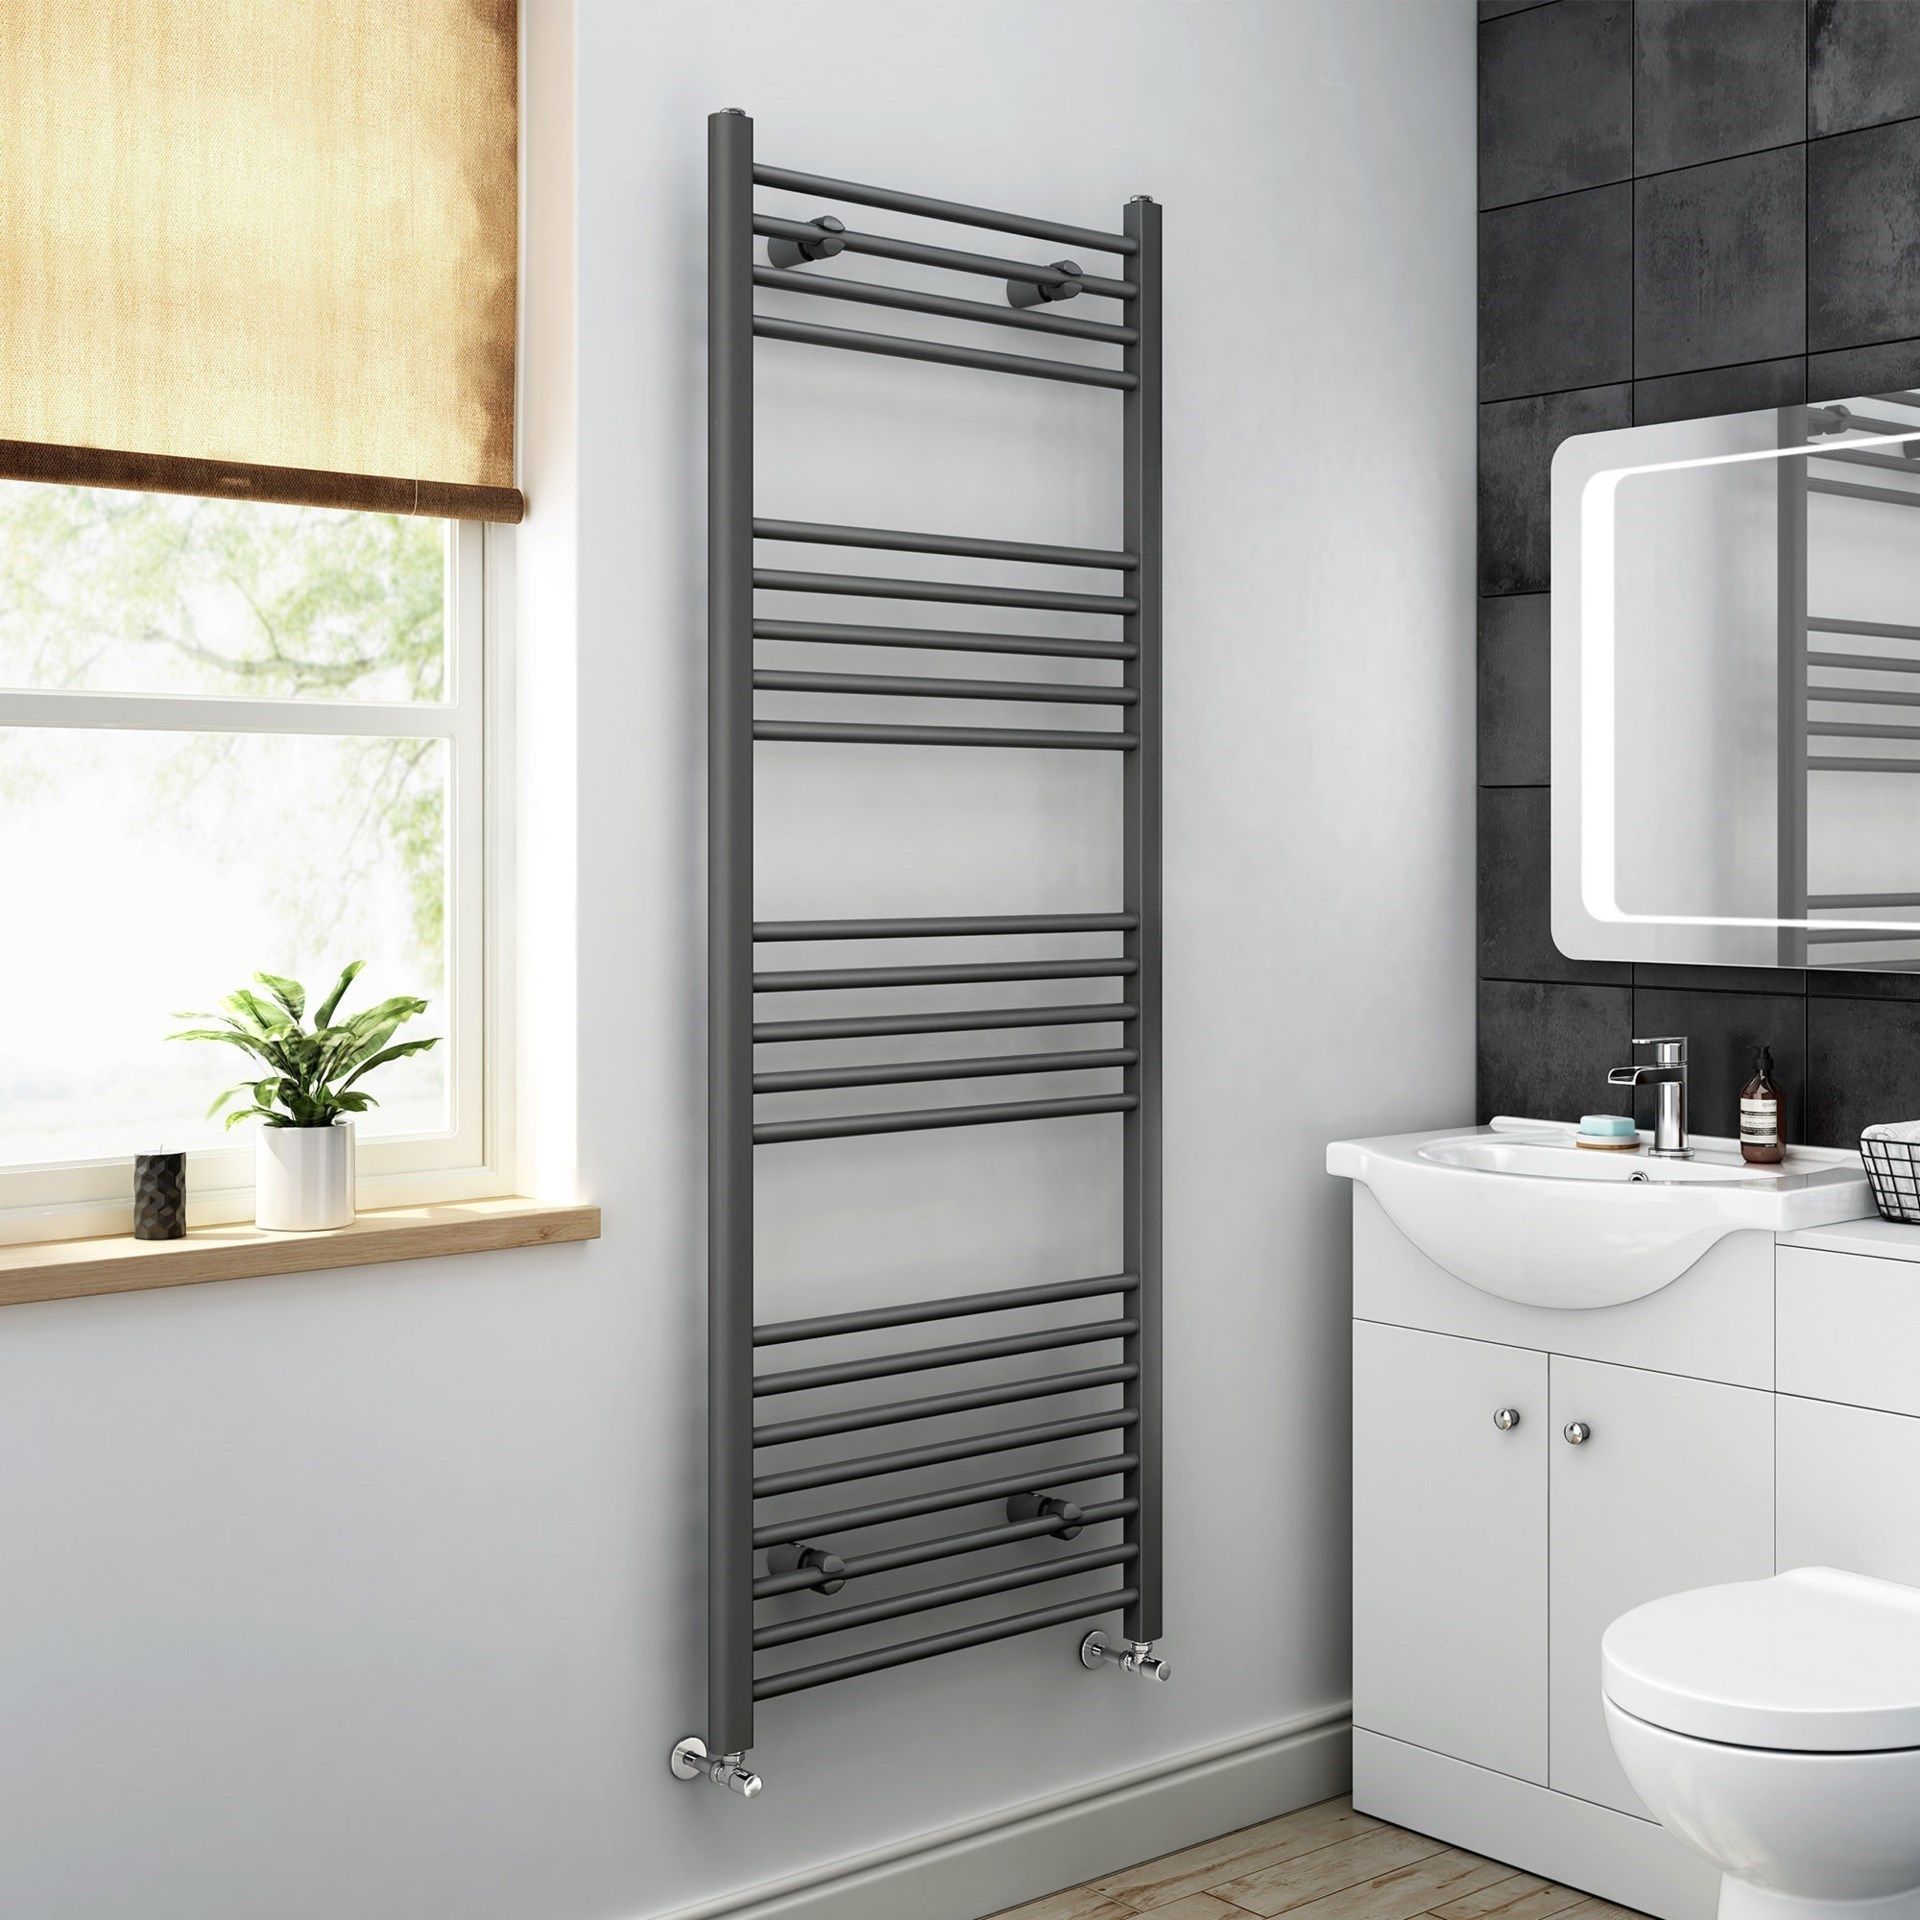 1600x450mm - 20mm Tubes - Anthracite Heated Straight Rail Ladder Towel Radiator. Na1600450.RRP... - Image 2 of 2